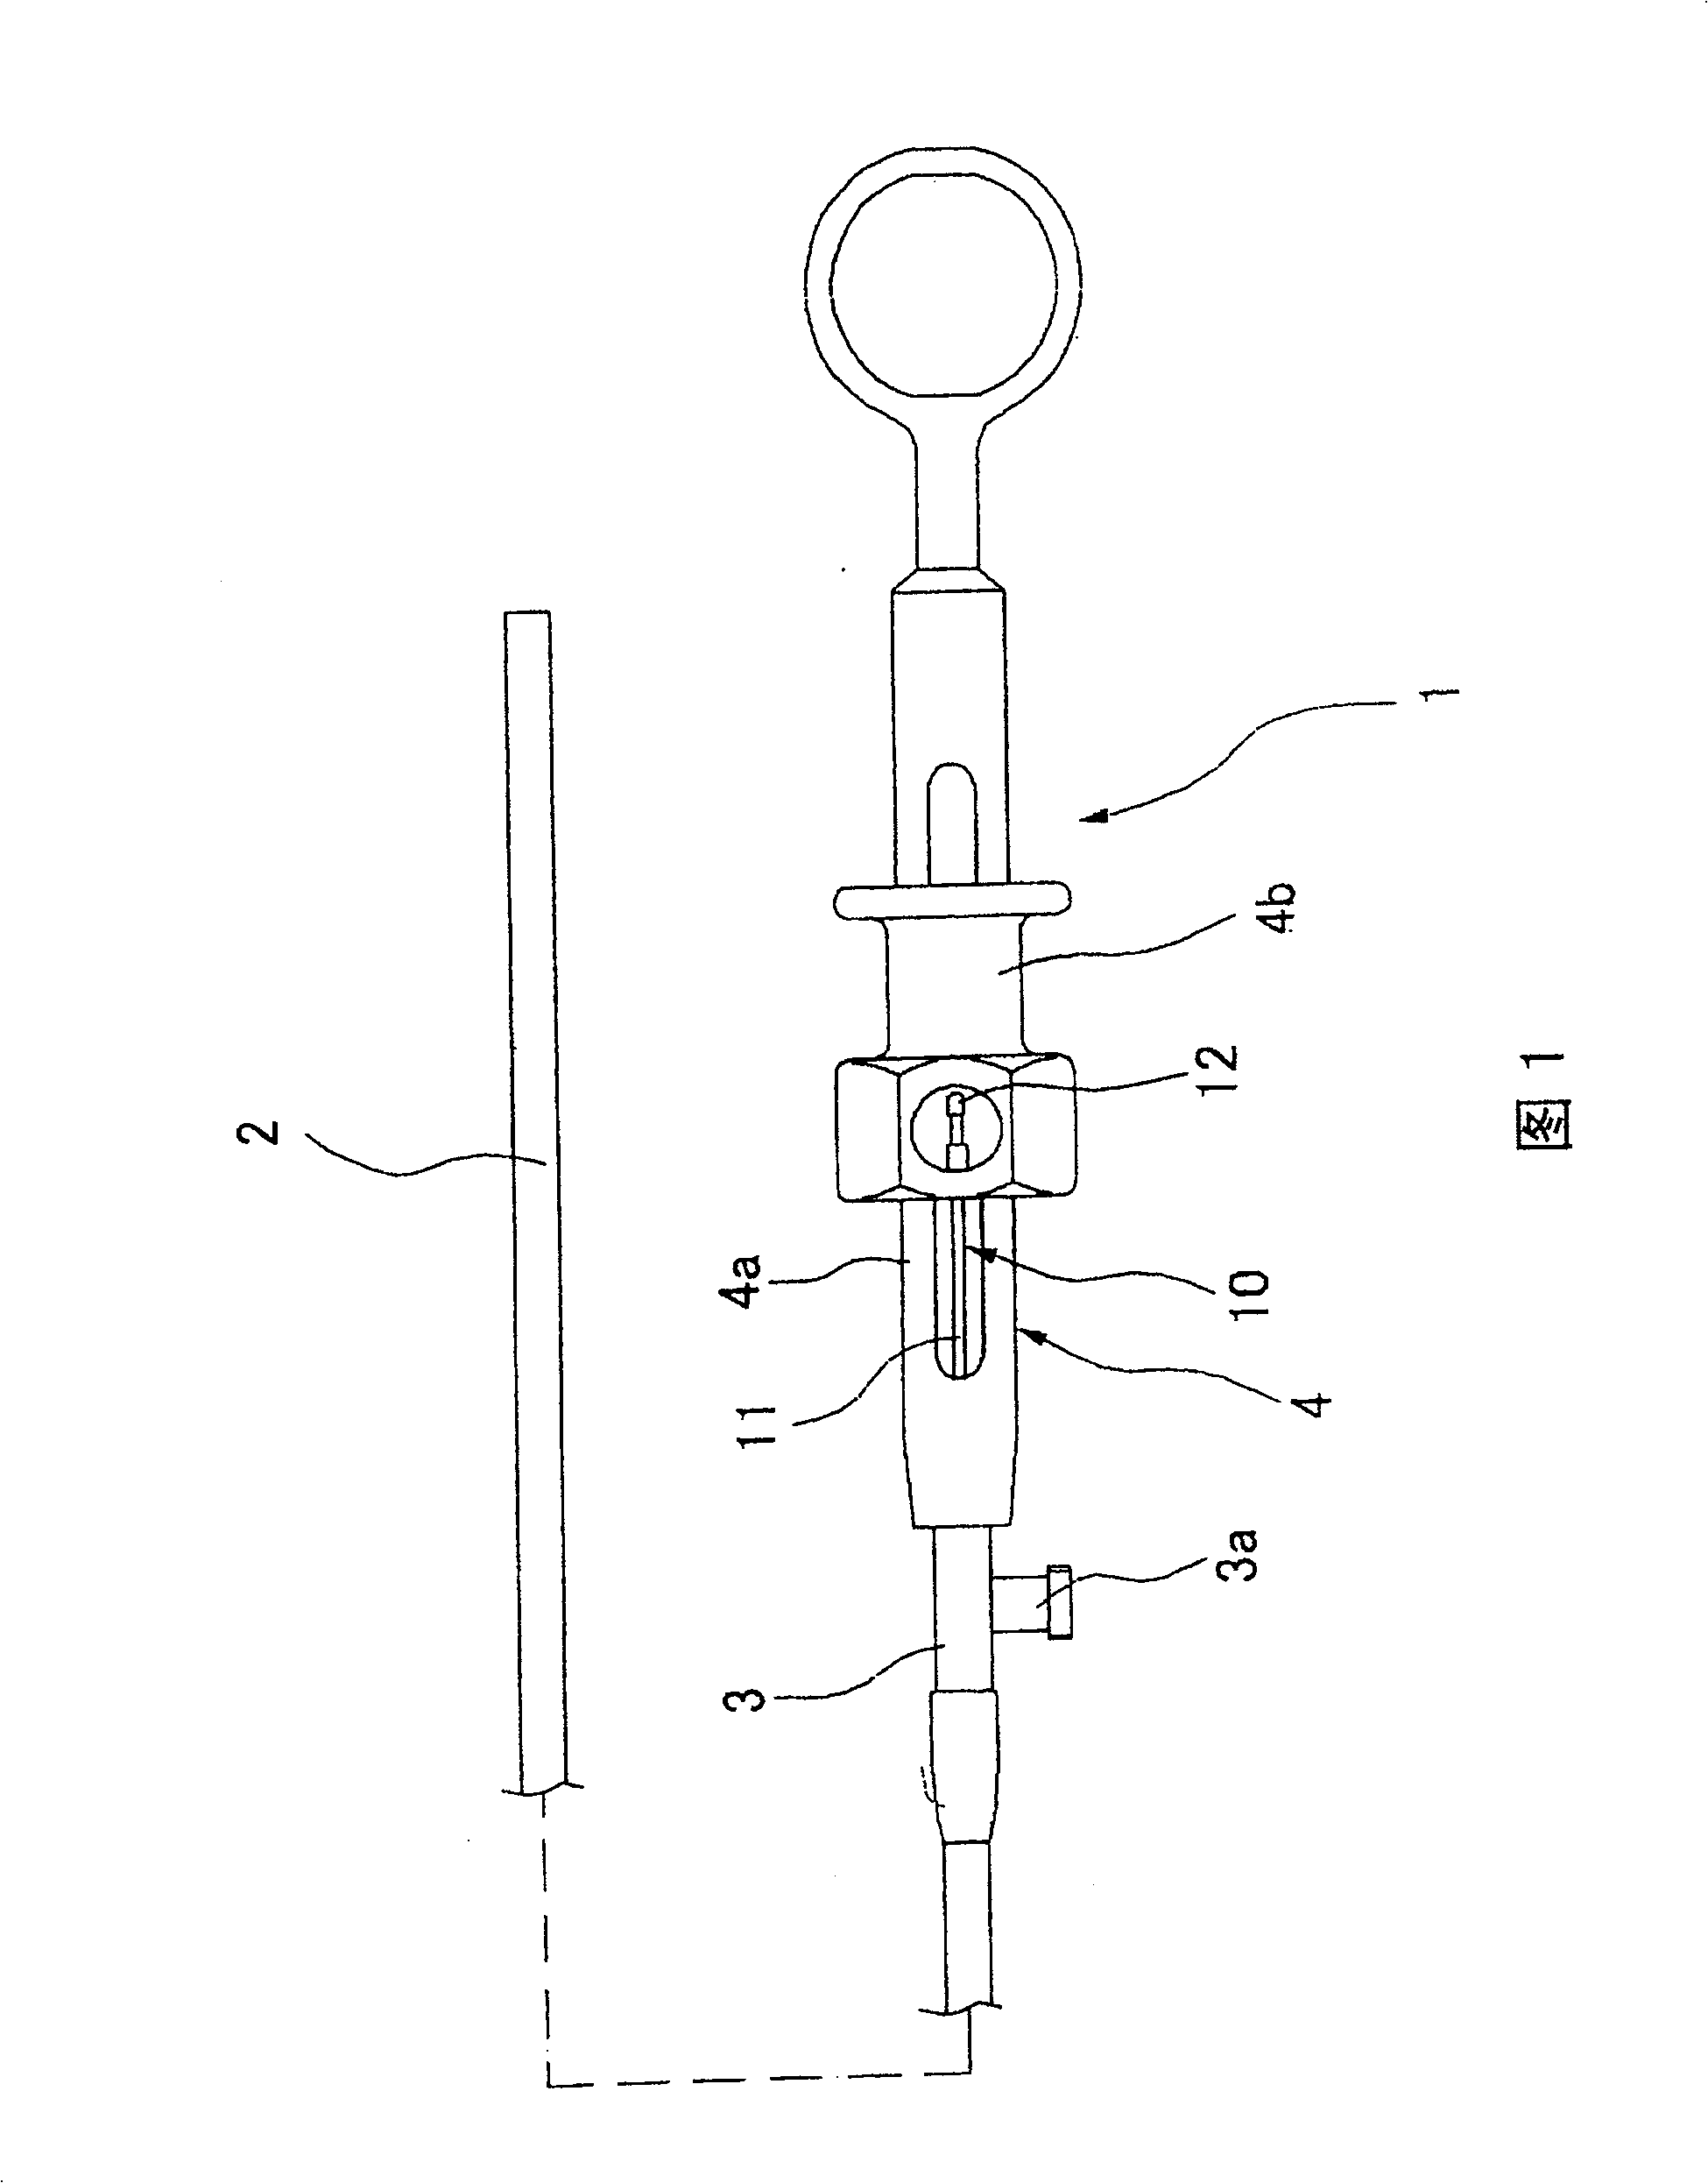 High-frequency treatment tool